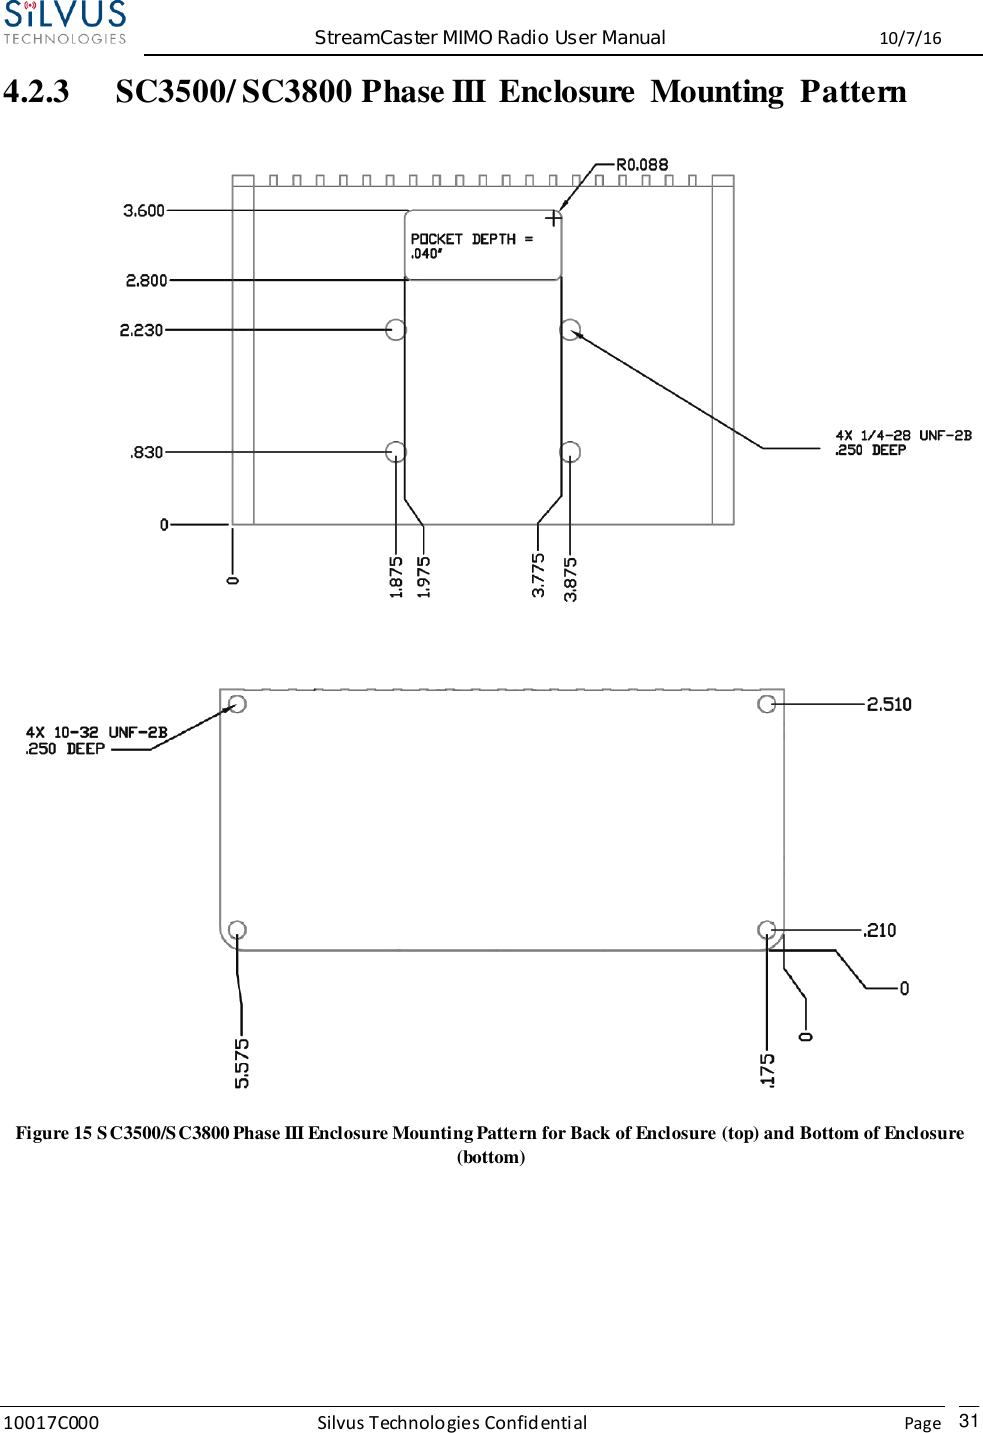  StreamCaster MIMO Radio User Manual  10/7/16 10017C000 Silvus Technologies Confidential    Page   31 4.2.3 SC3500/ SC3800 Phase III  Enclosure  Mounting  Pattern   Figure 15 SC3500/SC3800 Phase III Enclosure Mounting Pattern for Back of Enclosure (top) and Bottom of Enclosure (bottom)   